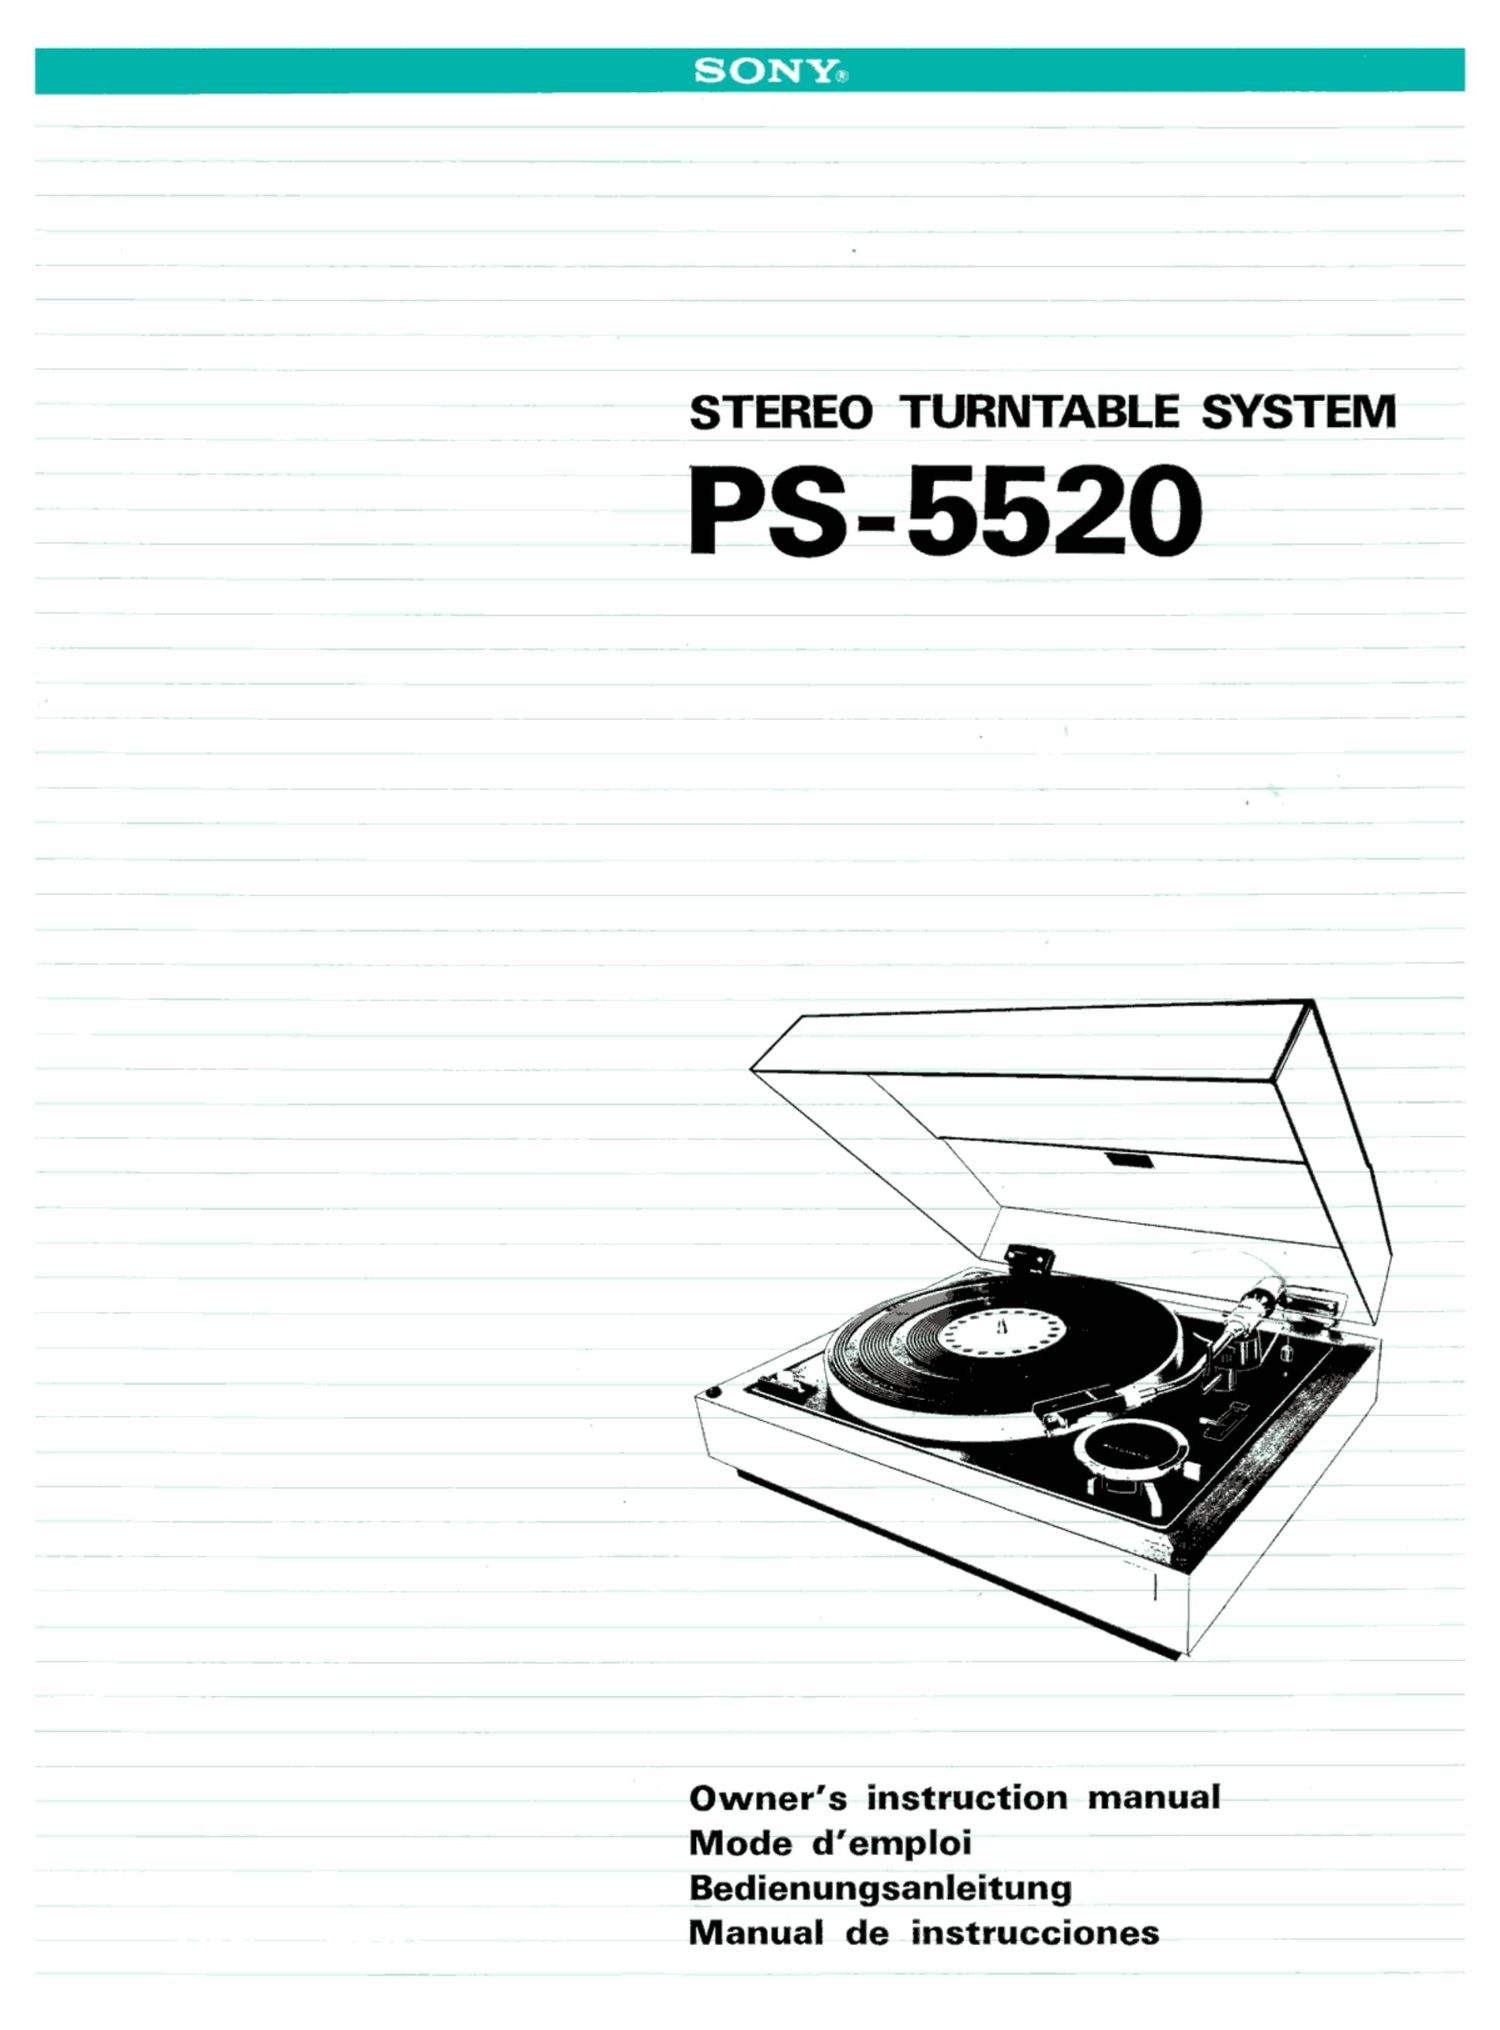 Sony PS 5520 Owners Manual